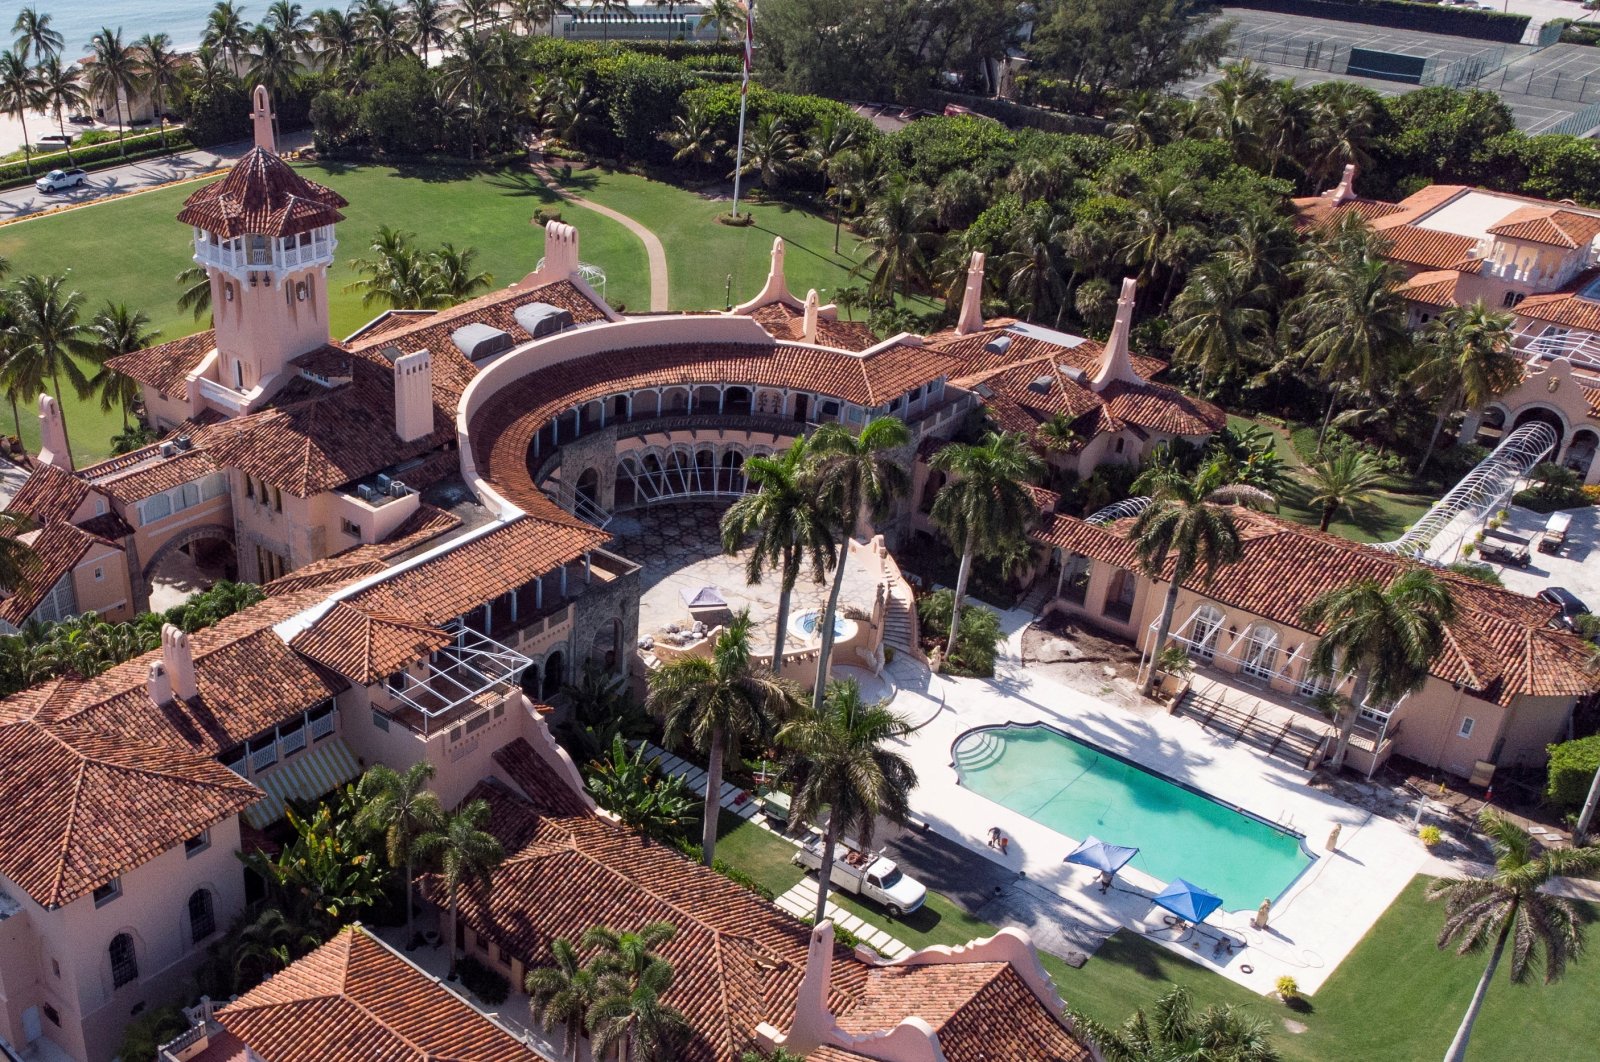 An aerial view of former U.S. President Donald Trump&#039;s Mar-a-Lago home after Trump said FBI agents searched it, in Palm Beach, Florida, U.S., Aug. 15, 2022. (Reuters Photo)